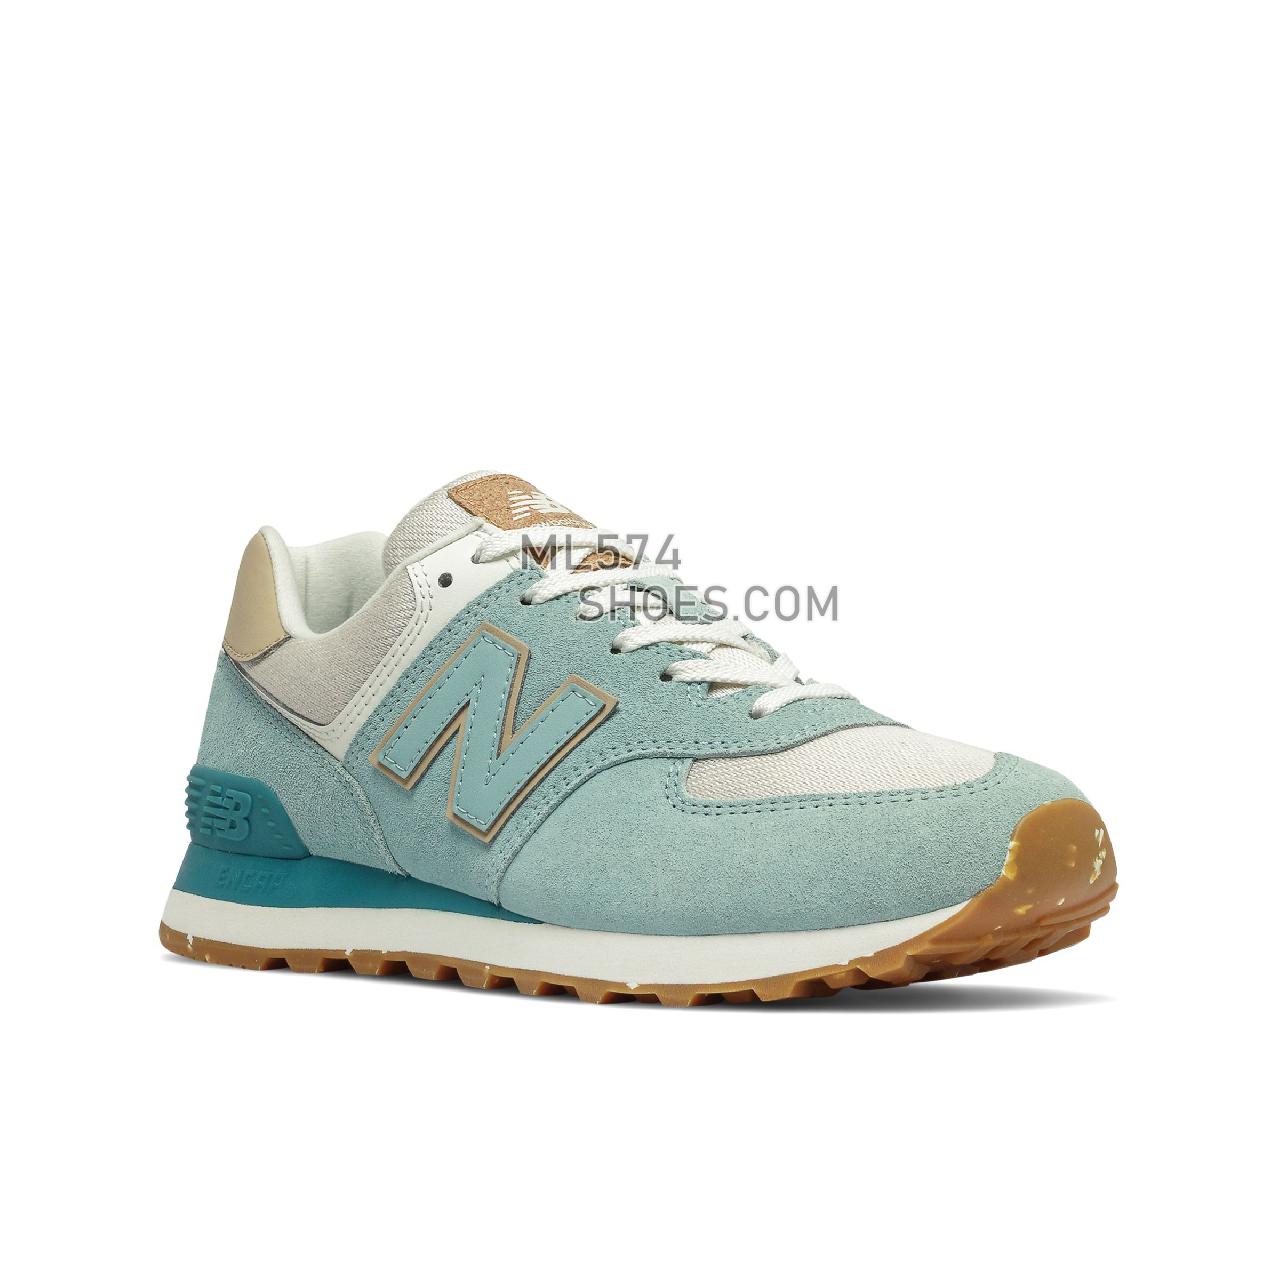 New Balance 574 - Women's Classic Sneakers - Storm Blue with Sea Salt - WL574SG2